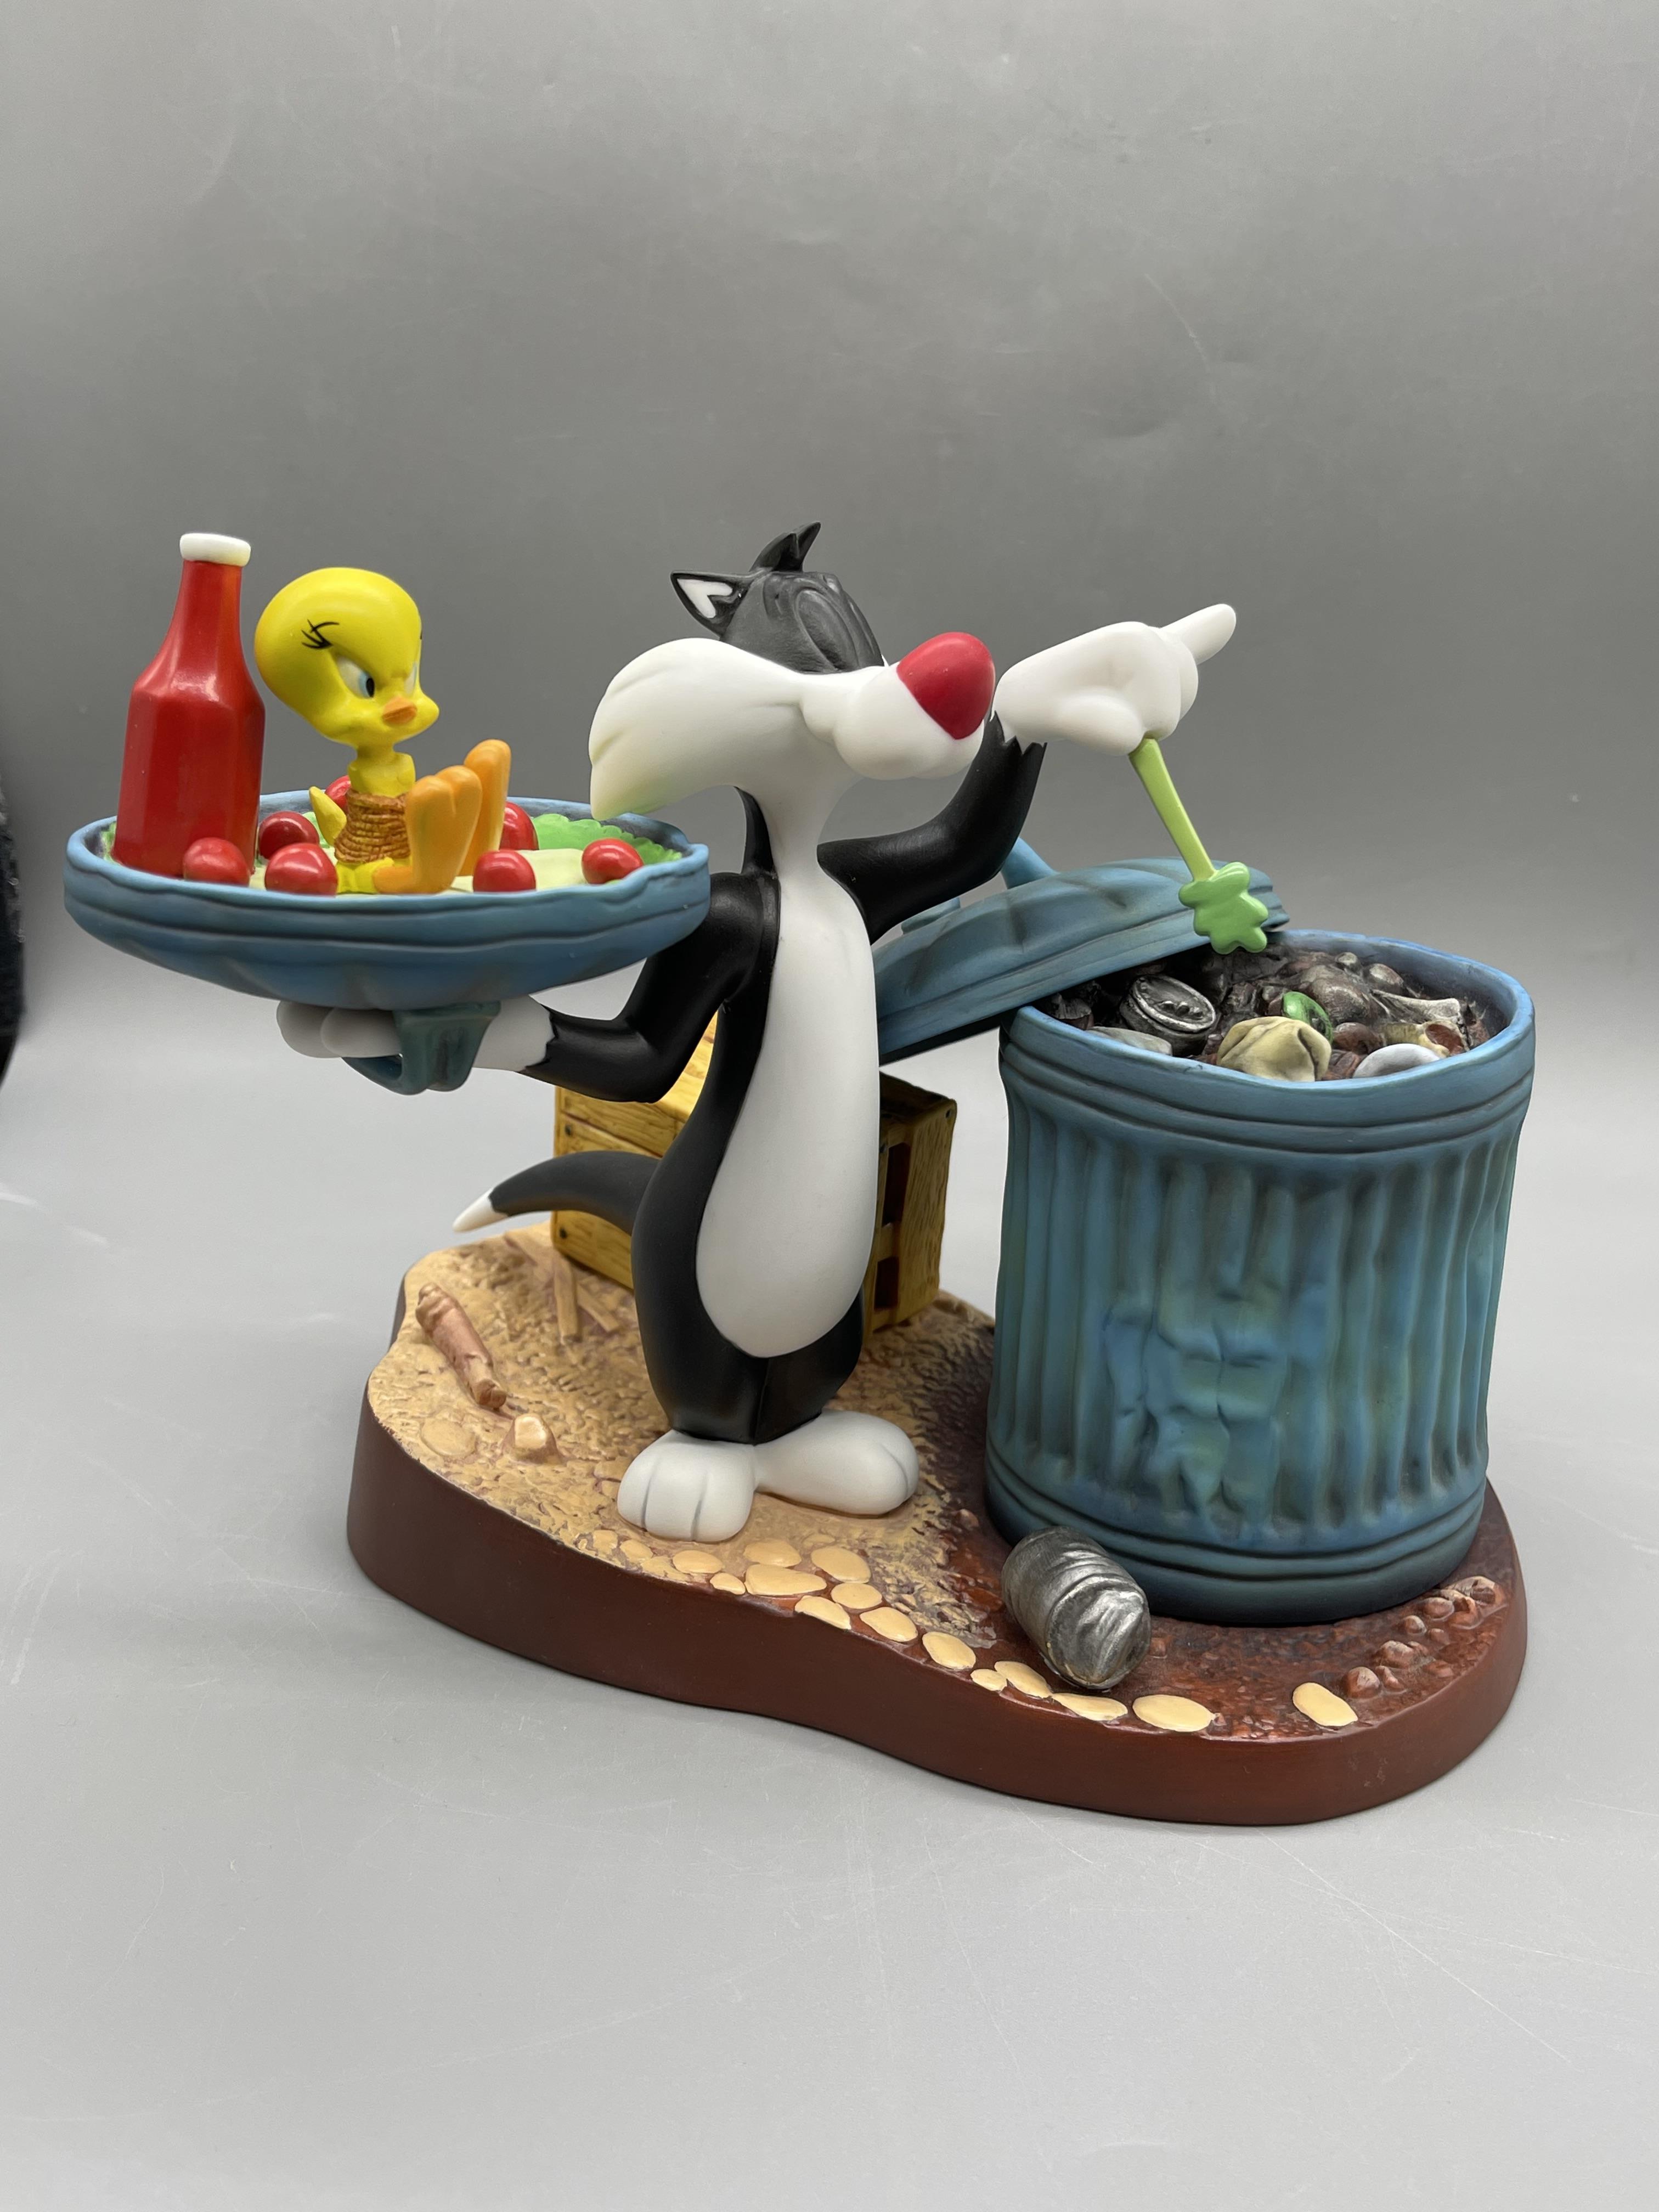 Boxed Wedgewood - Looney Tunes - Sylvester's Buffe - Image 11 of 18